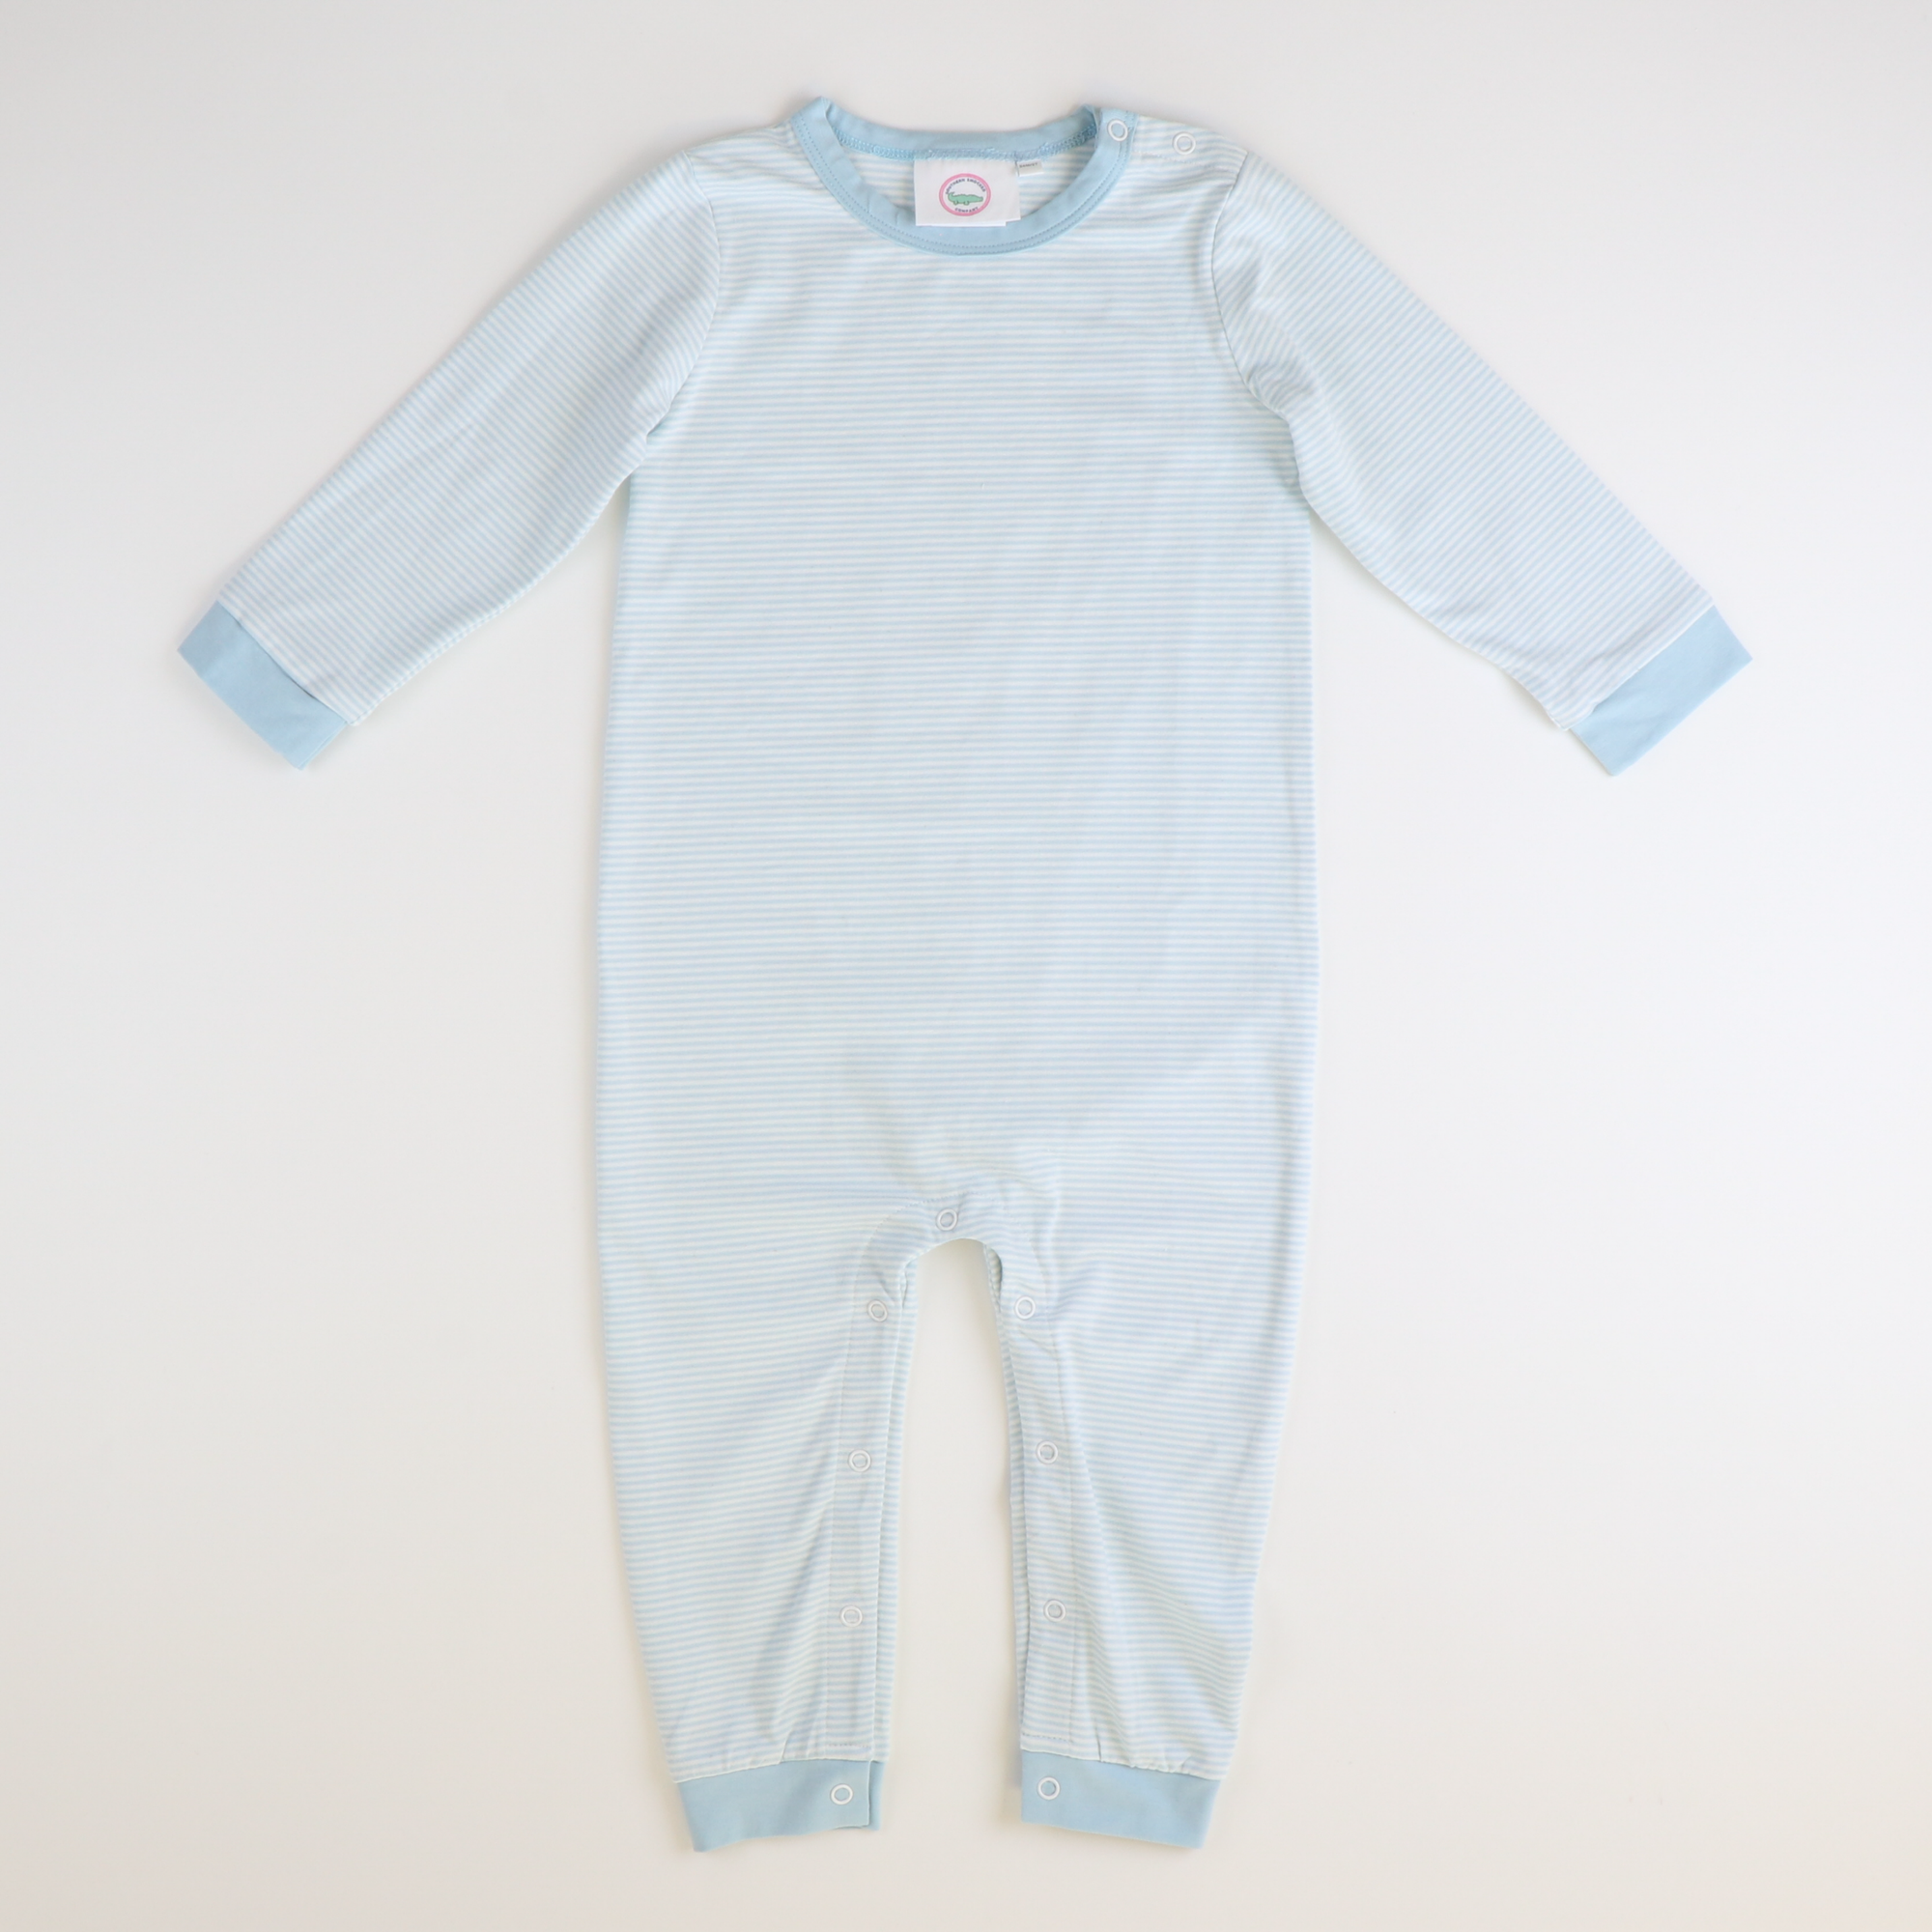 L/S Out & About Romper - Light Blue & White Thin Stripe